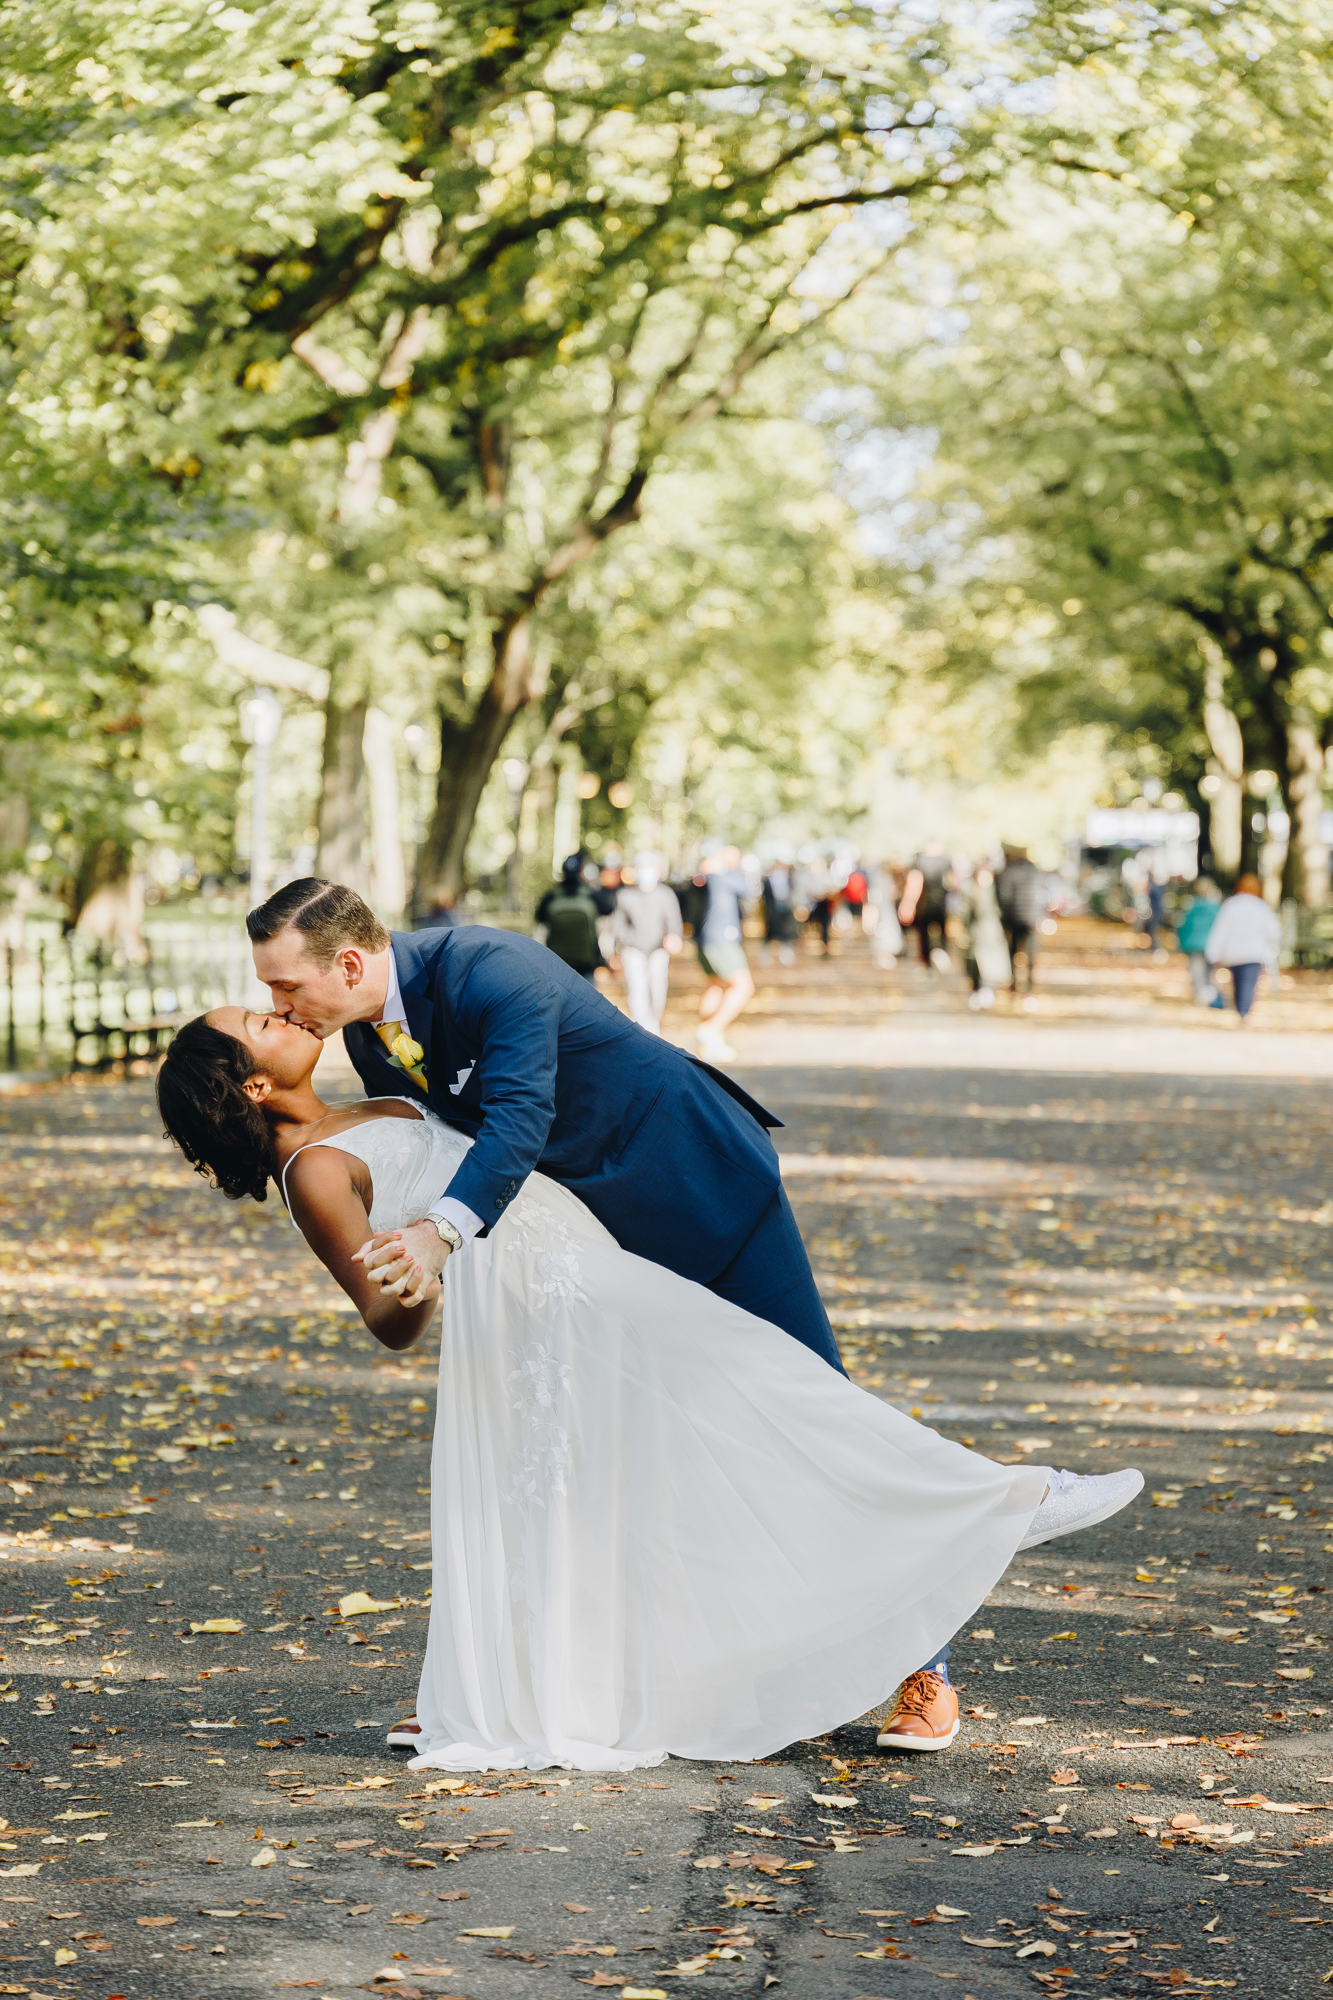 Beautiful Central Park Elopement Photos in New York